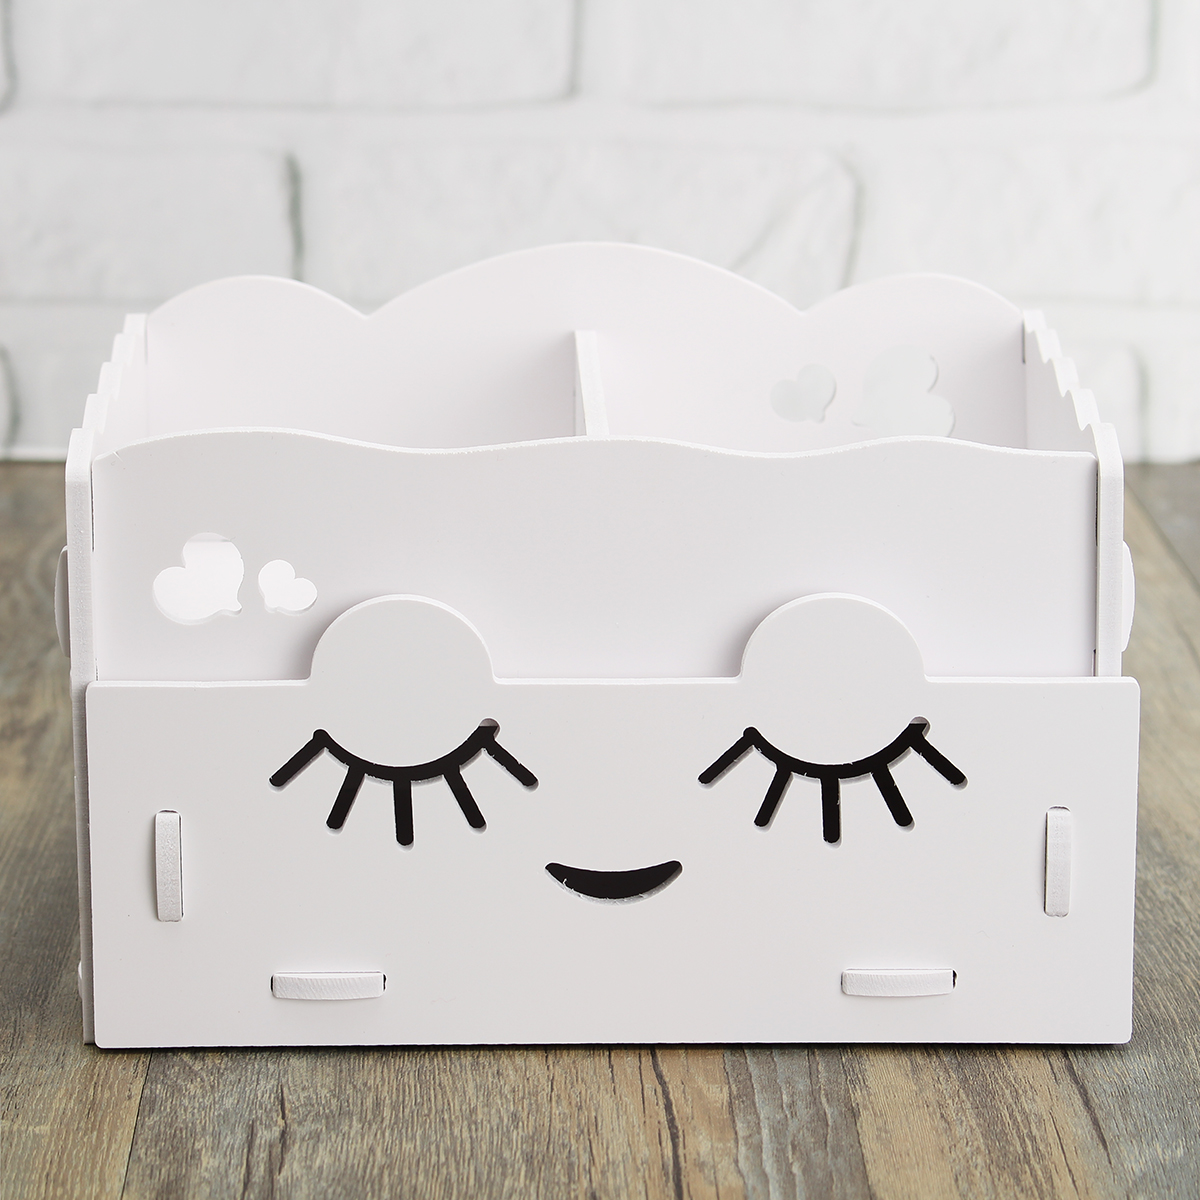 Smiling-Face-Cute-Wooden-White-Makeup-Organizer-Neat-Table-Collecting-Case-Cosmetics-Tools-1123232-4